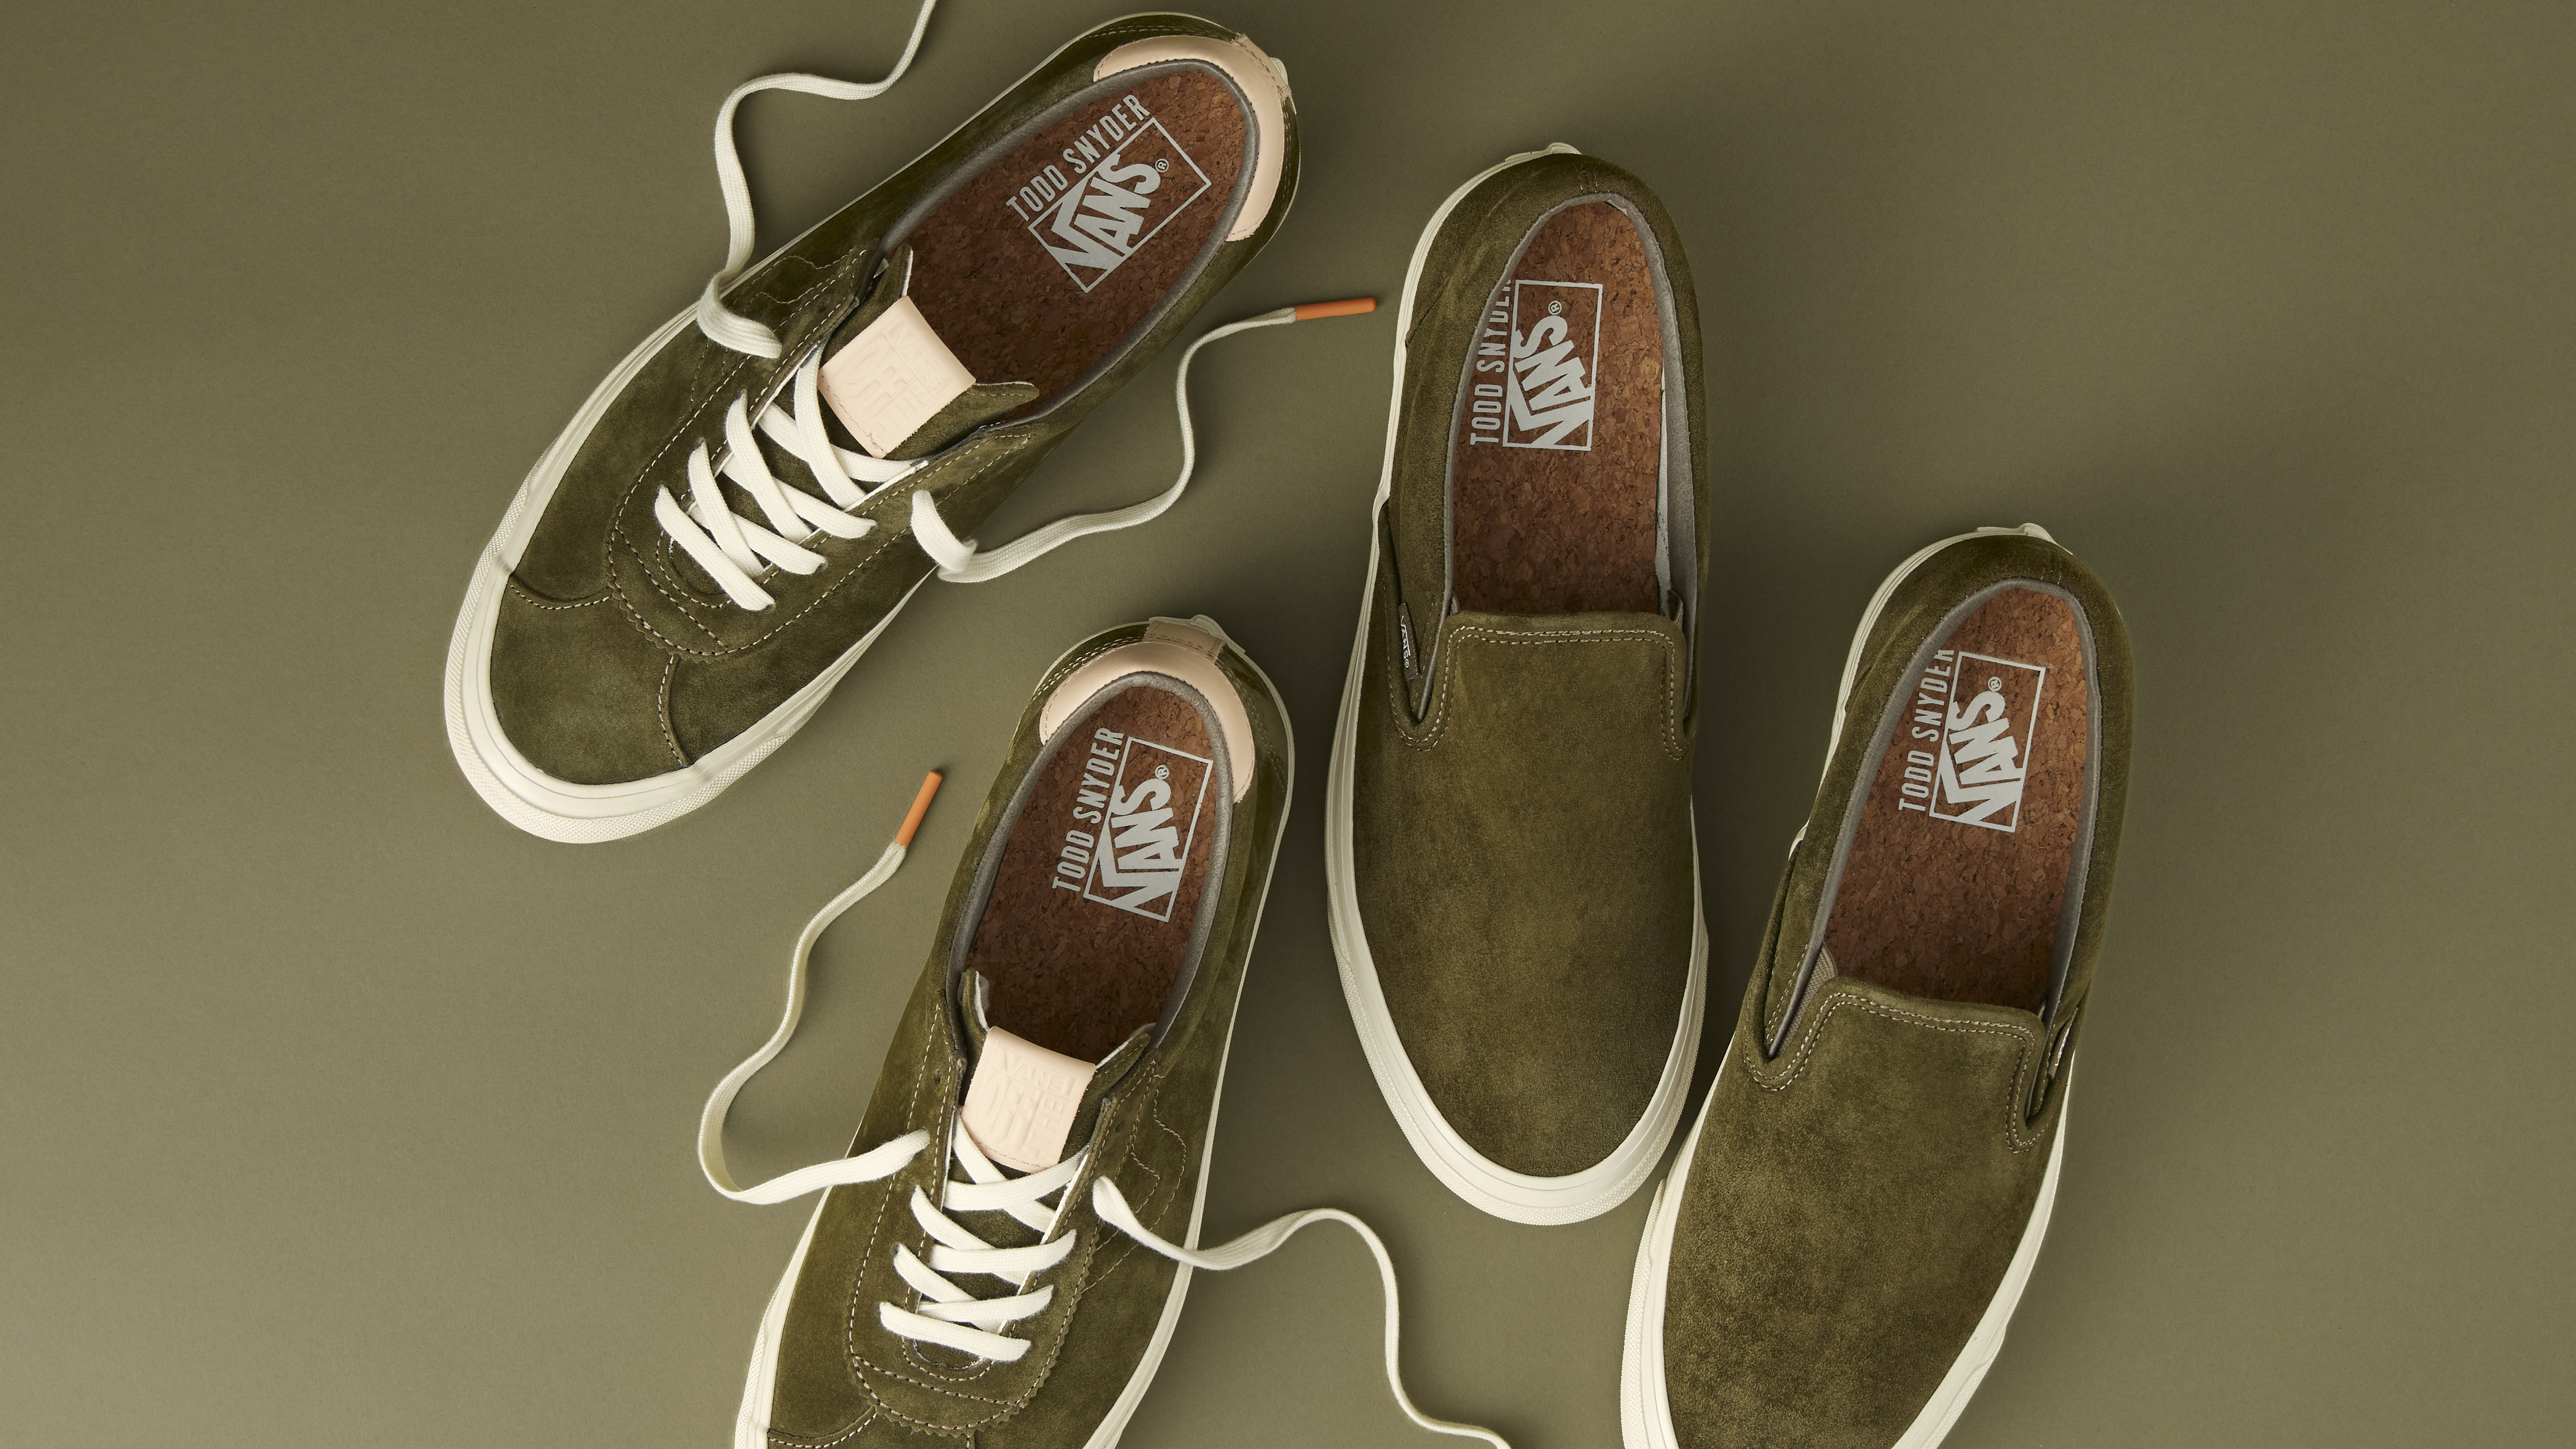 This Todd Snyder x Vans Collab Is Inspired by Dirty Martinis